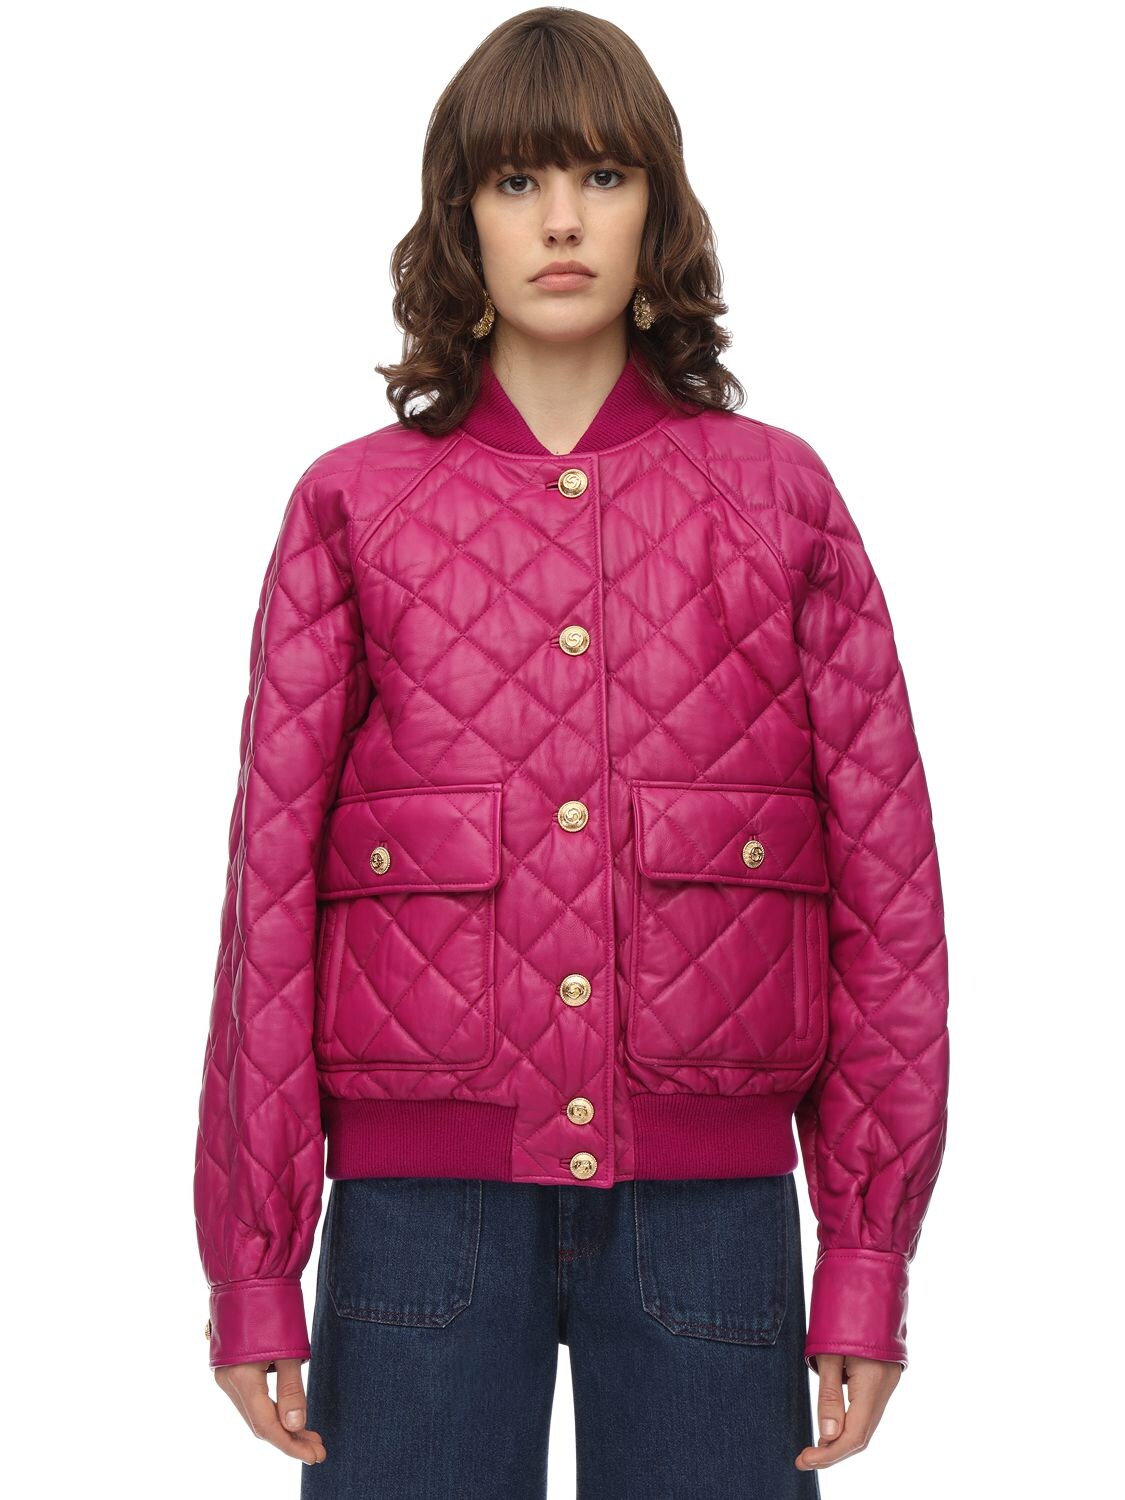 GUCCI QUILTED LEATHER BOMBER JACKET,70I5K1018-NTAXOQ2